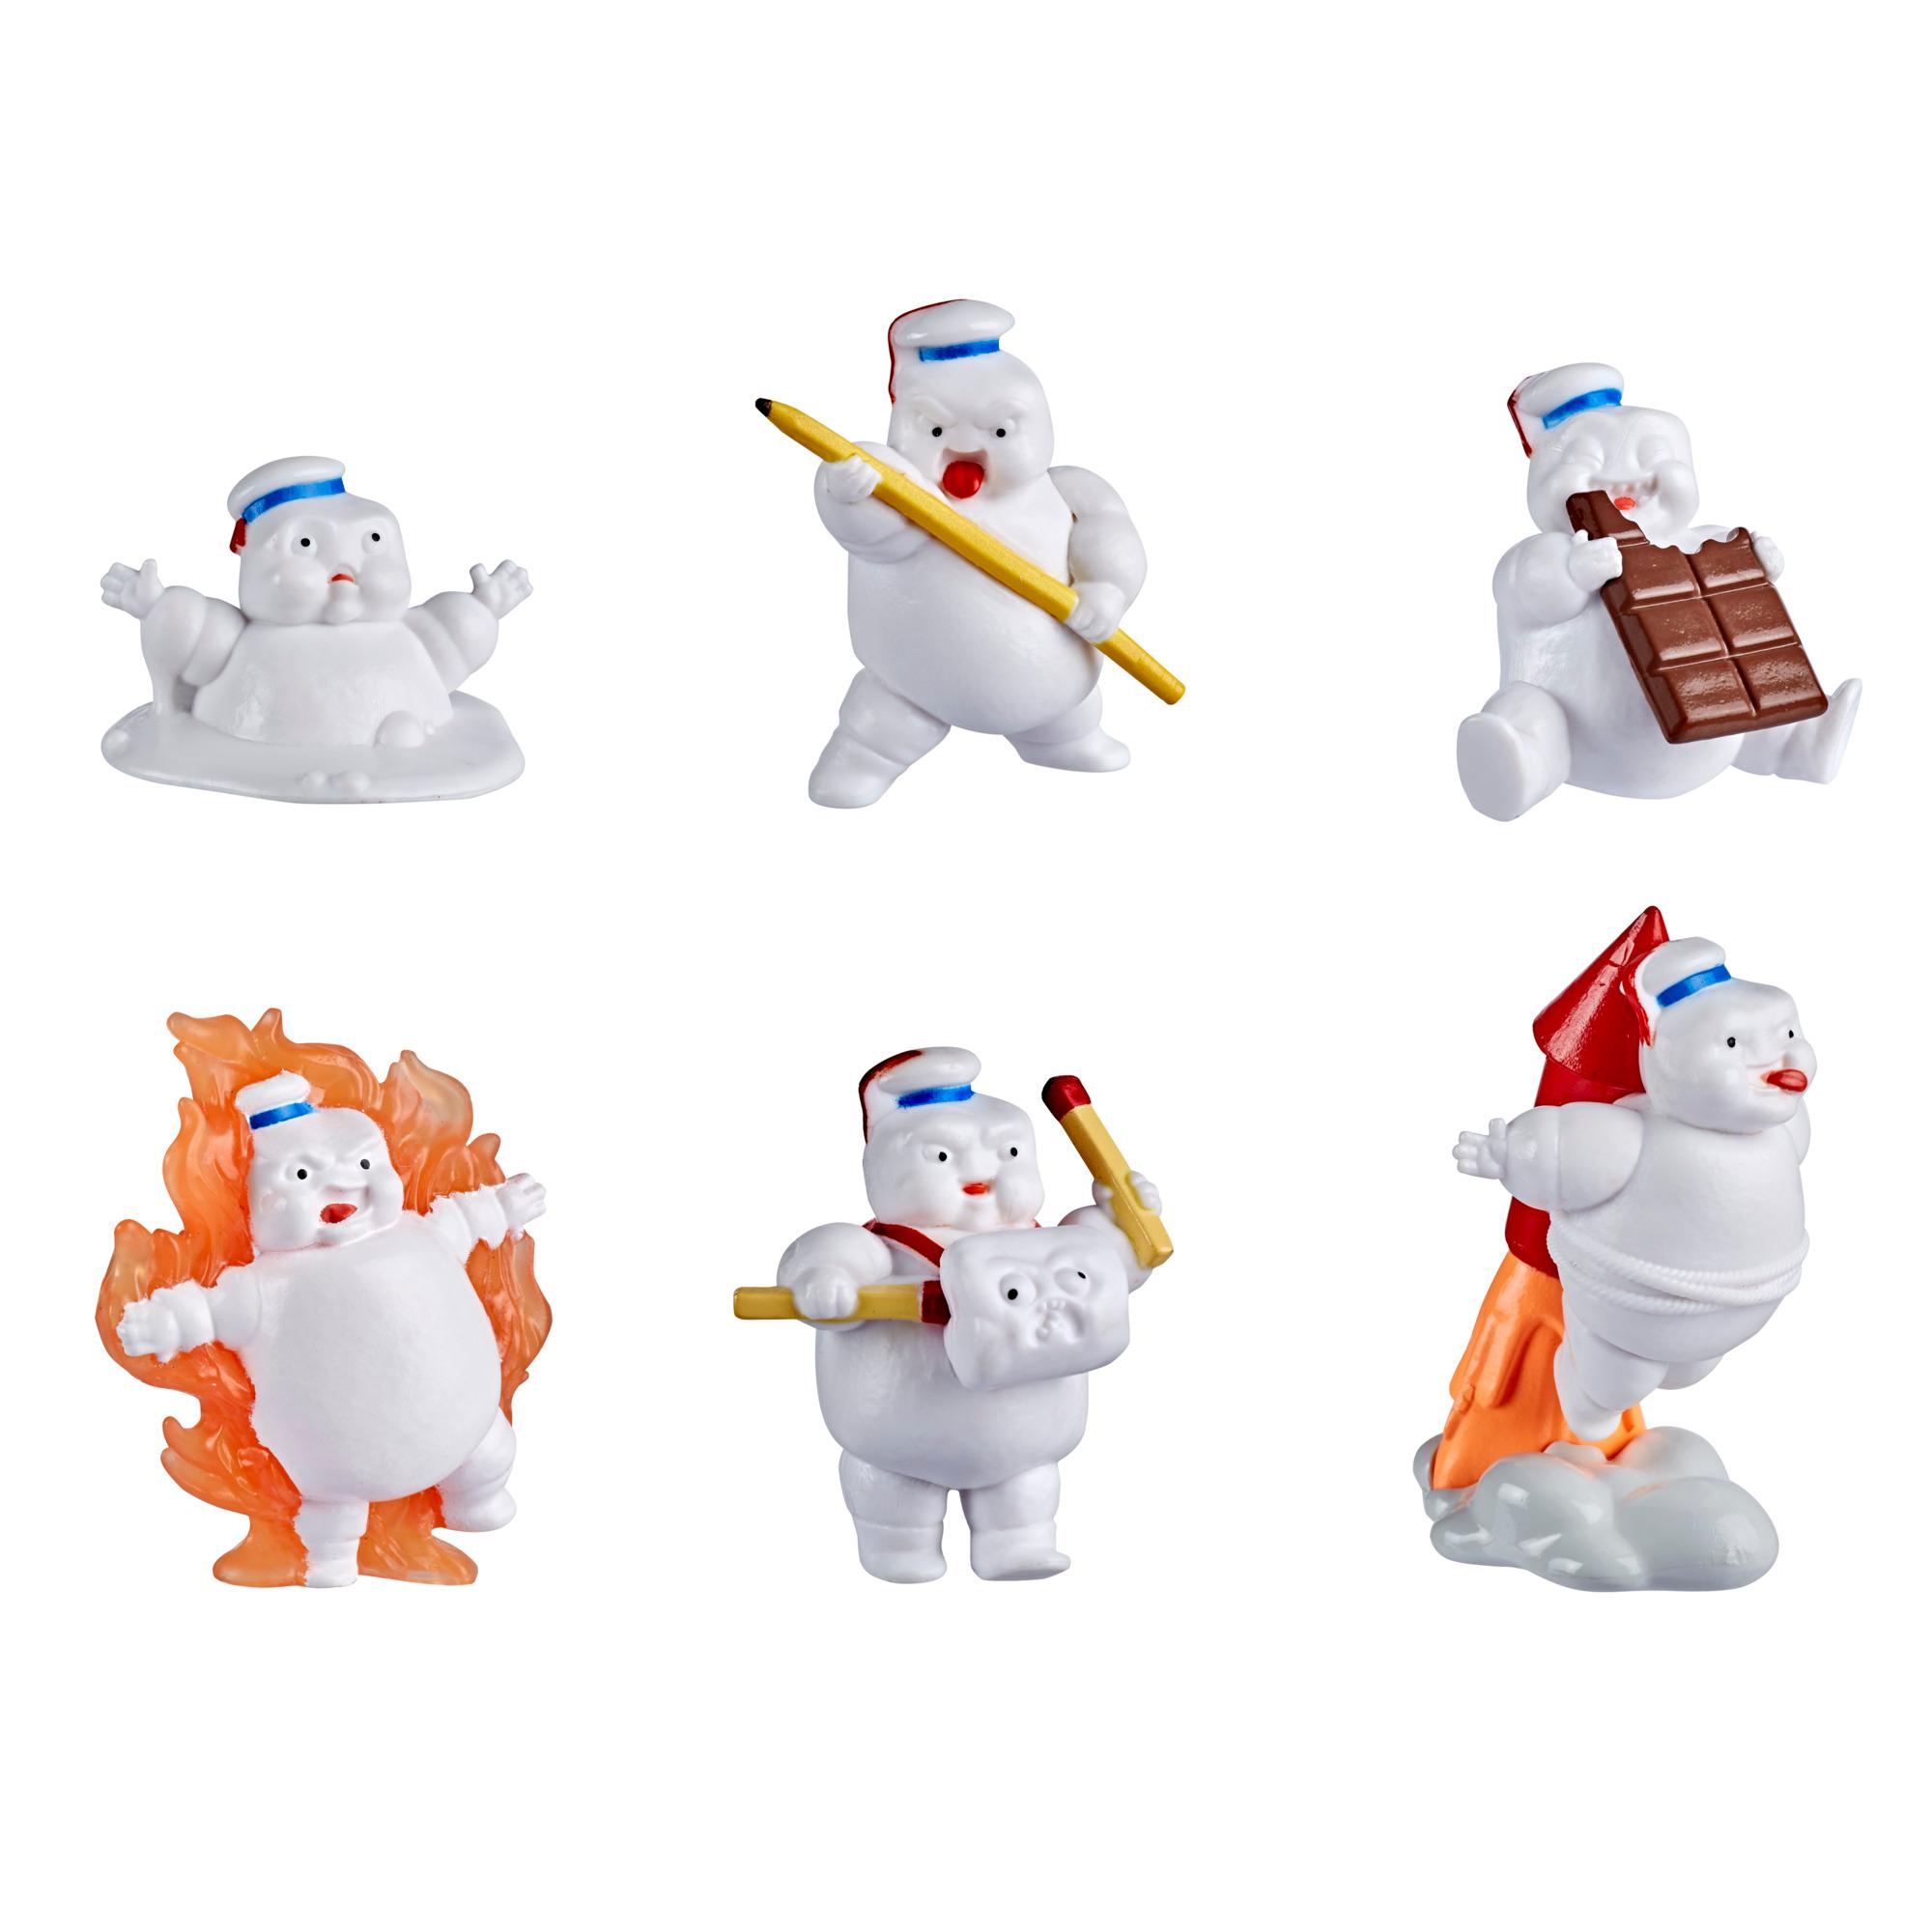 Ghostbusters Stay Puft Products Mini-Puft Surprise, Series 1, Randomly Assorted 1.5-Inch-Scale Figures, Ages 4 and Up